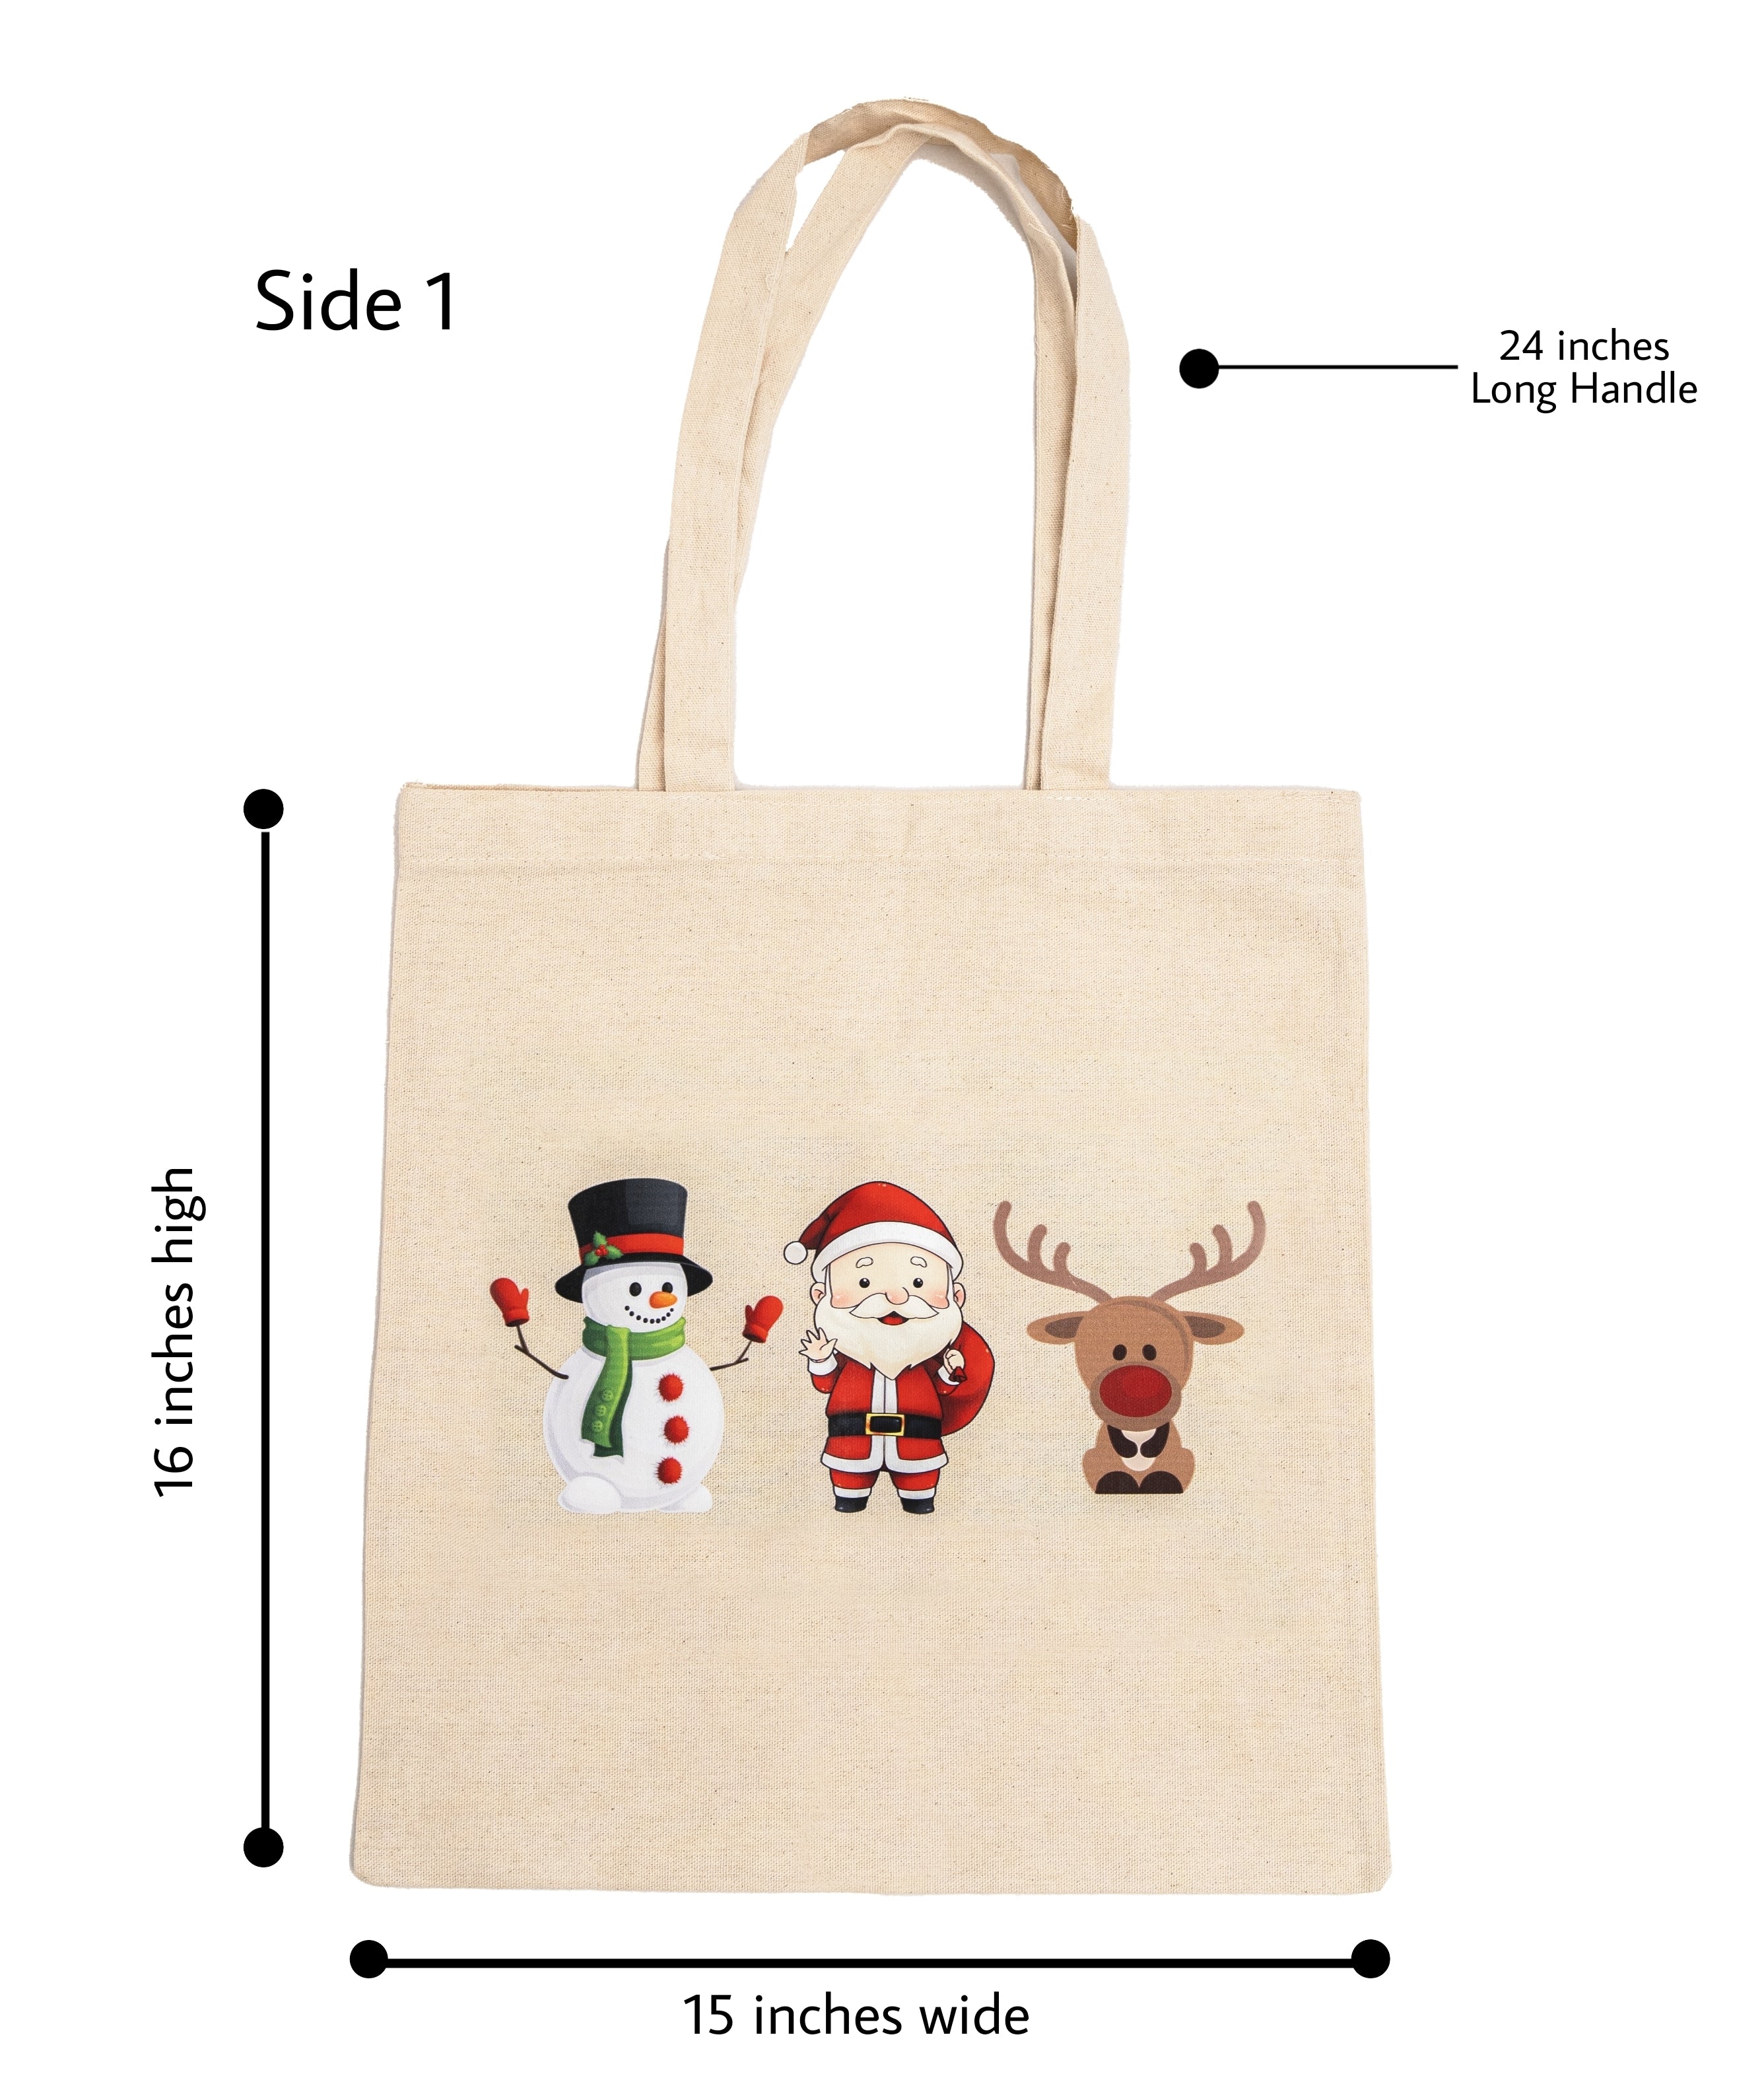 Jute Tote Bag with Cotton Padded Handle - Everything Bags Inc.